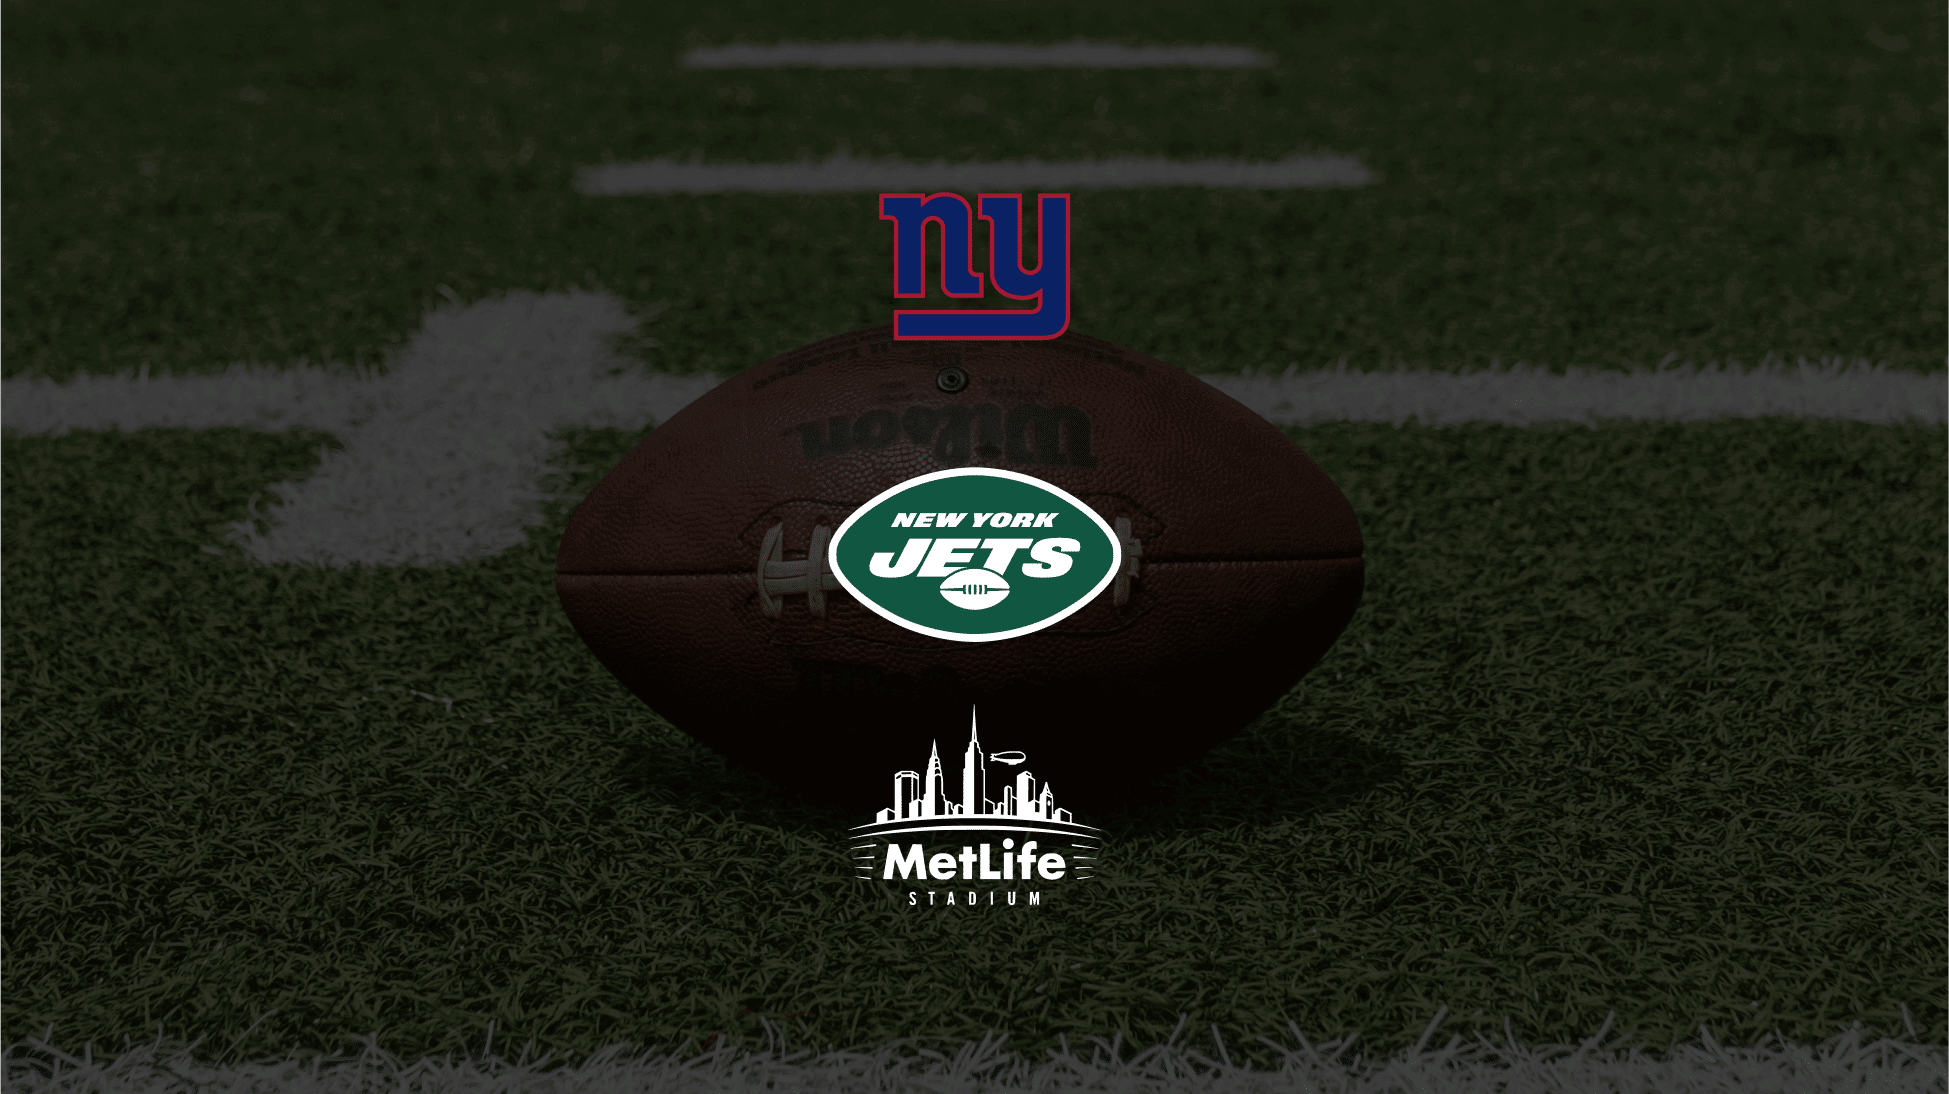 jets and MetLife logo over football and football field image